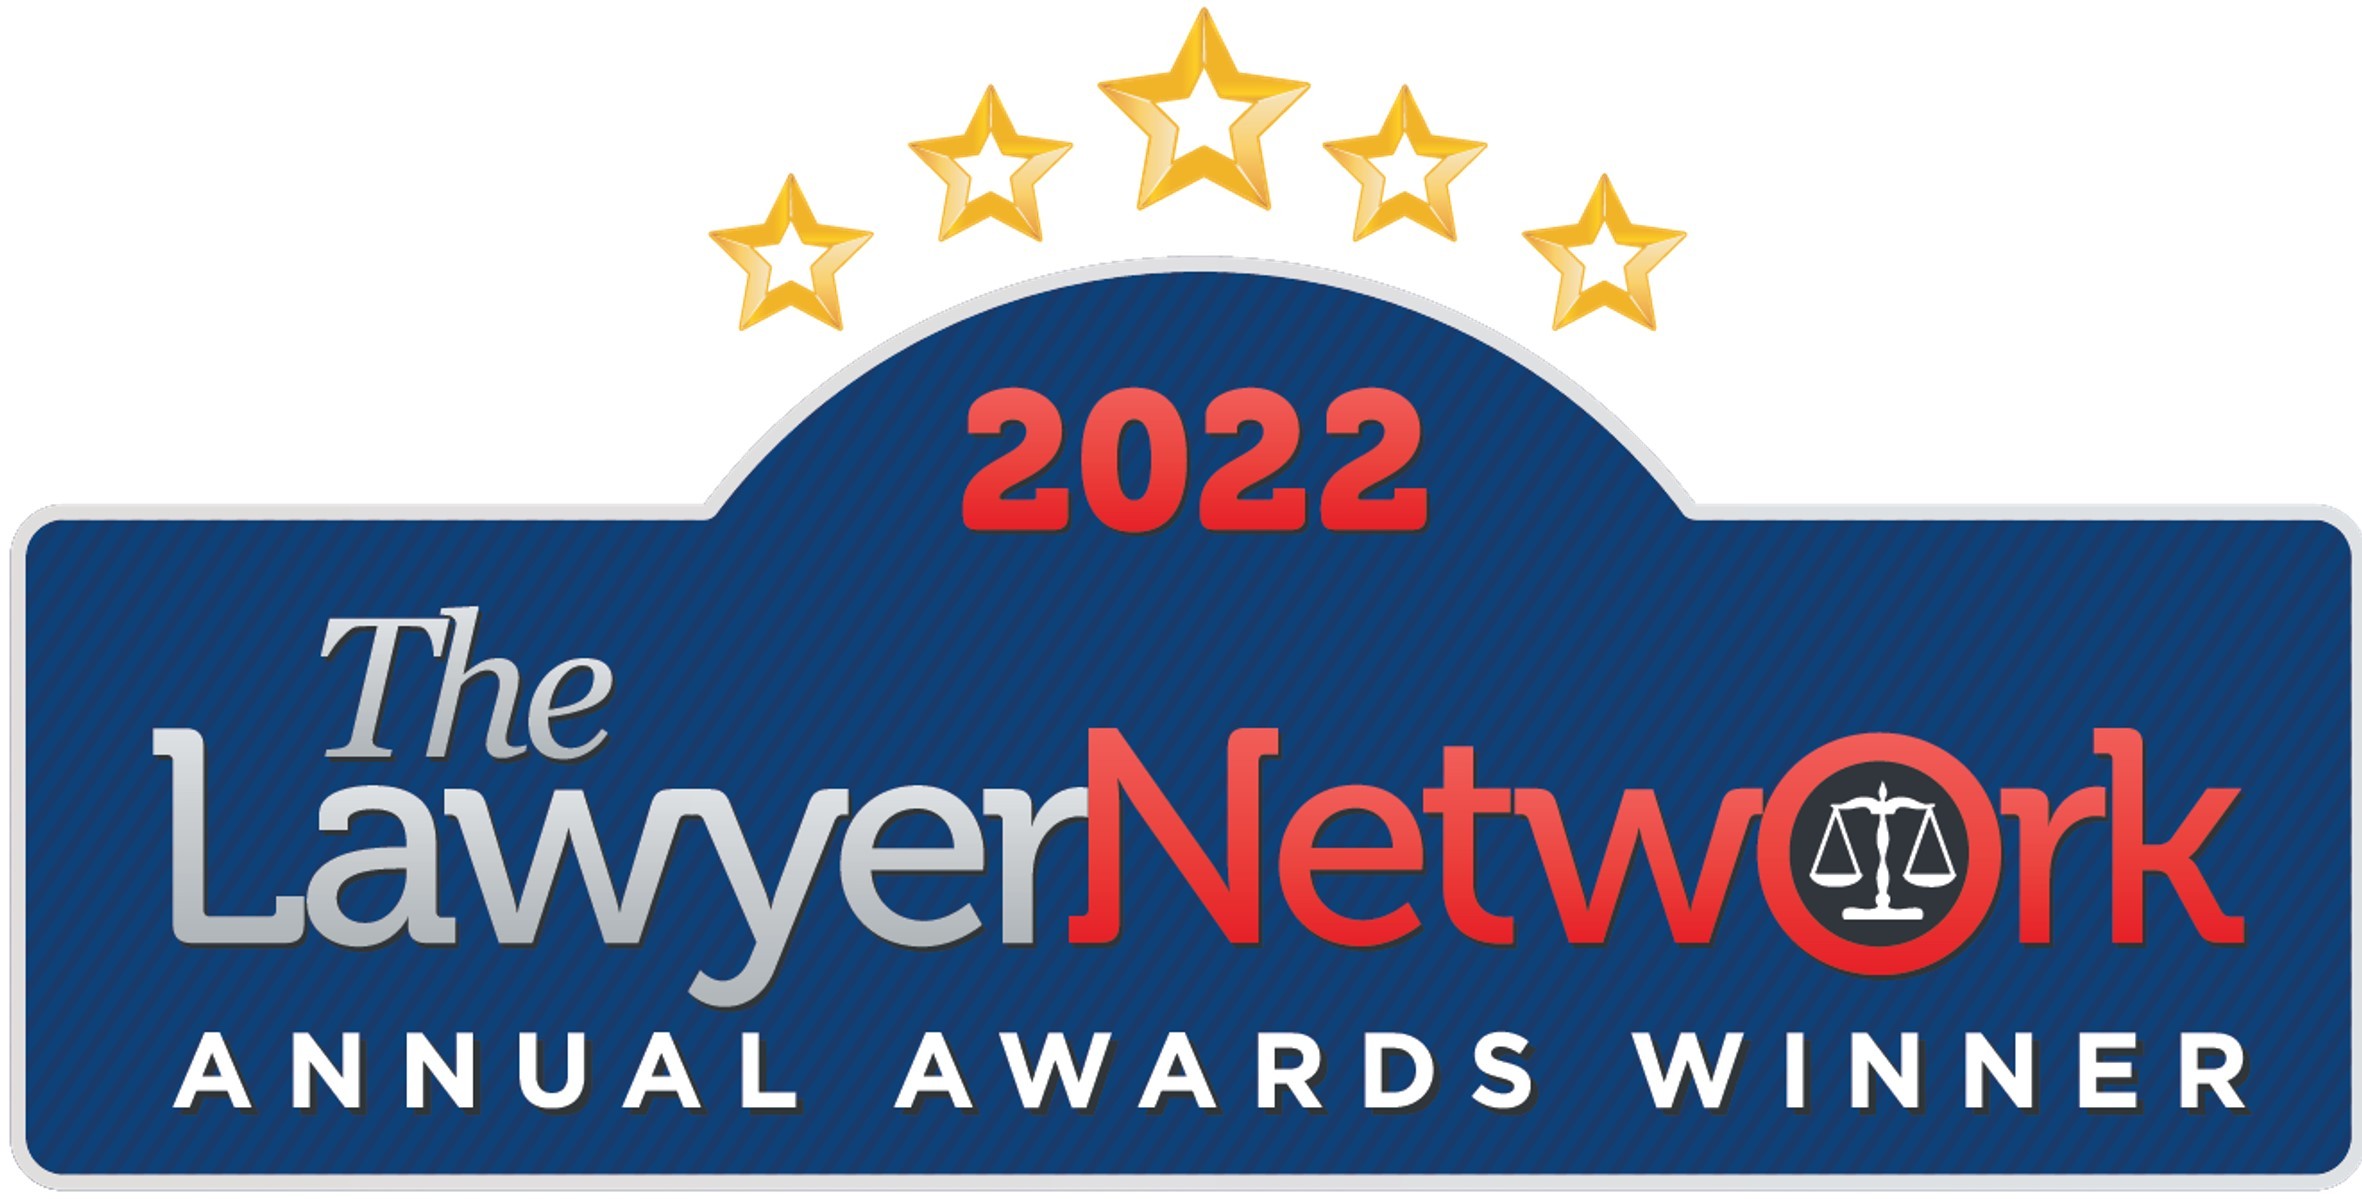 “Award Winner in M&A Law Expert of the Year in Hong Kong” by The Lawyer Network Annual Awards 2022